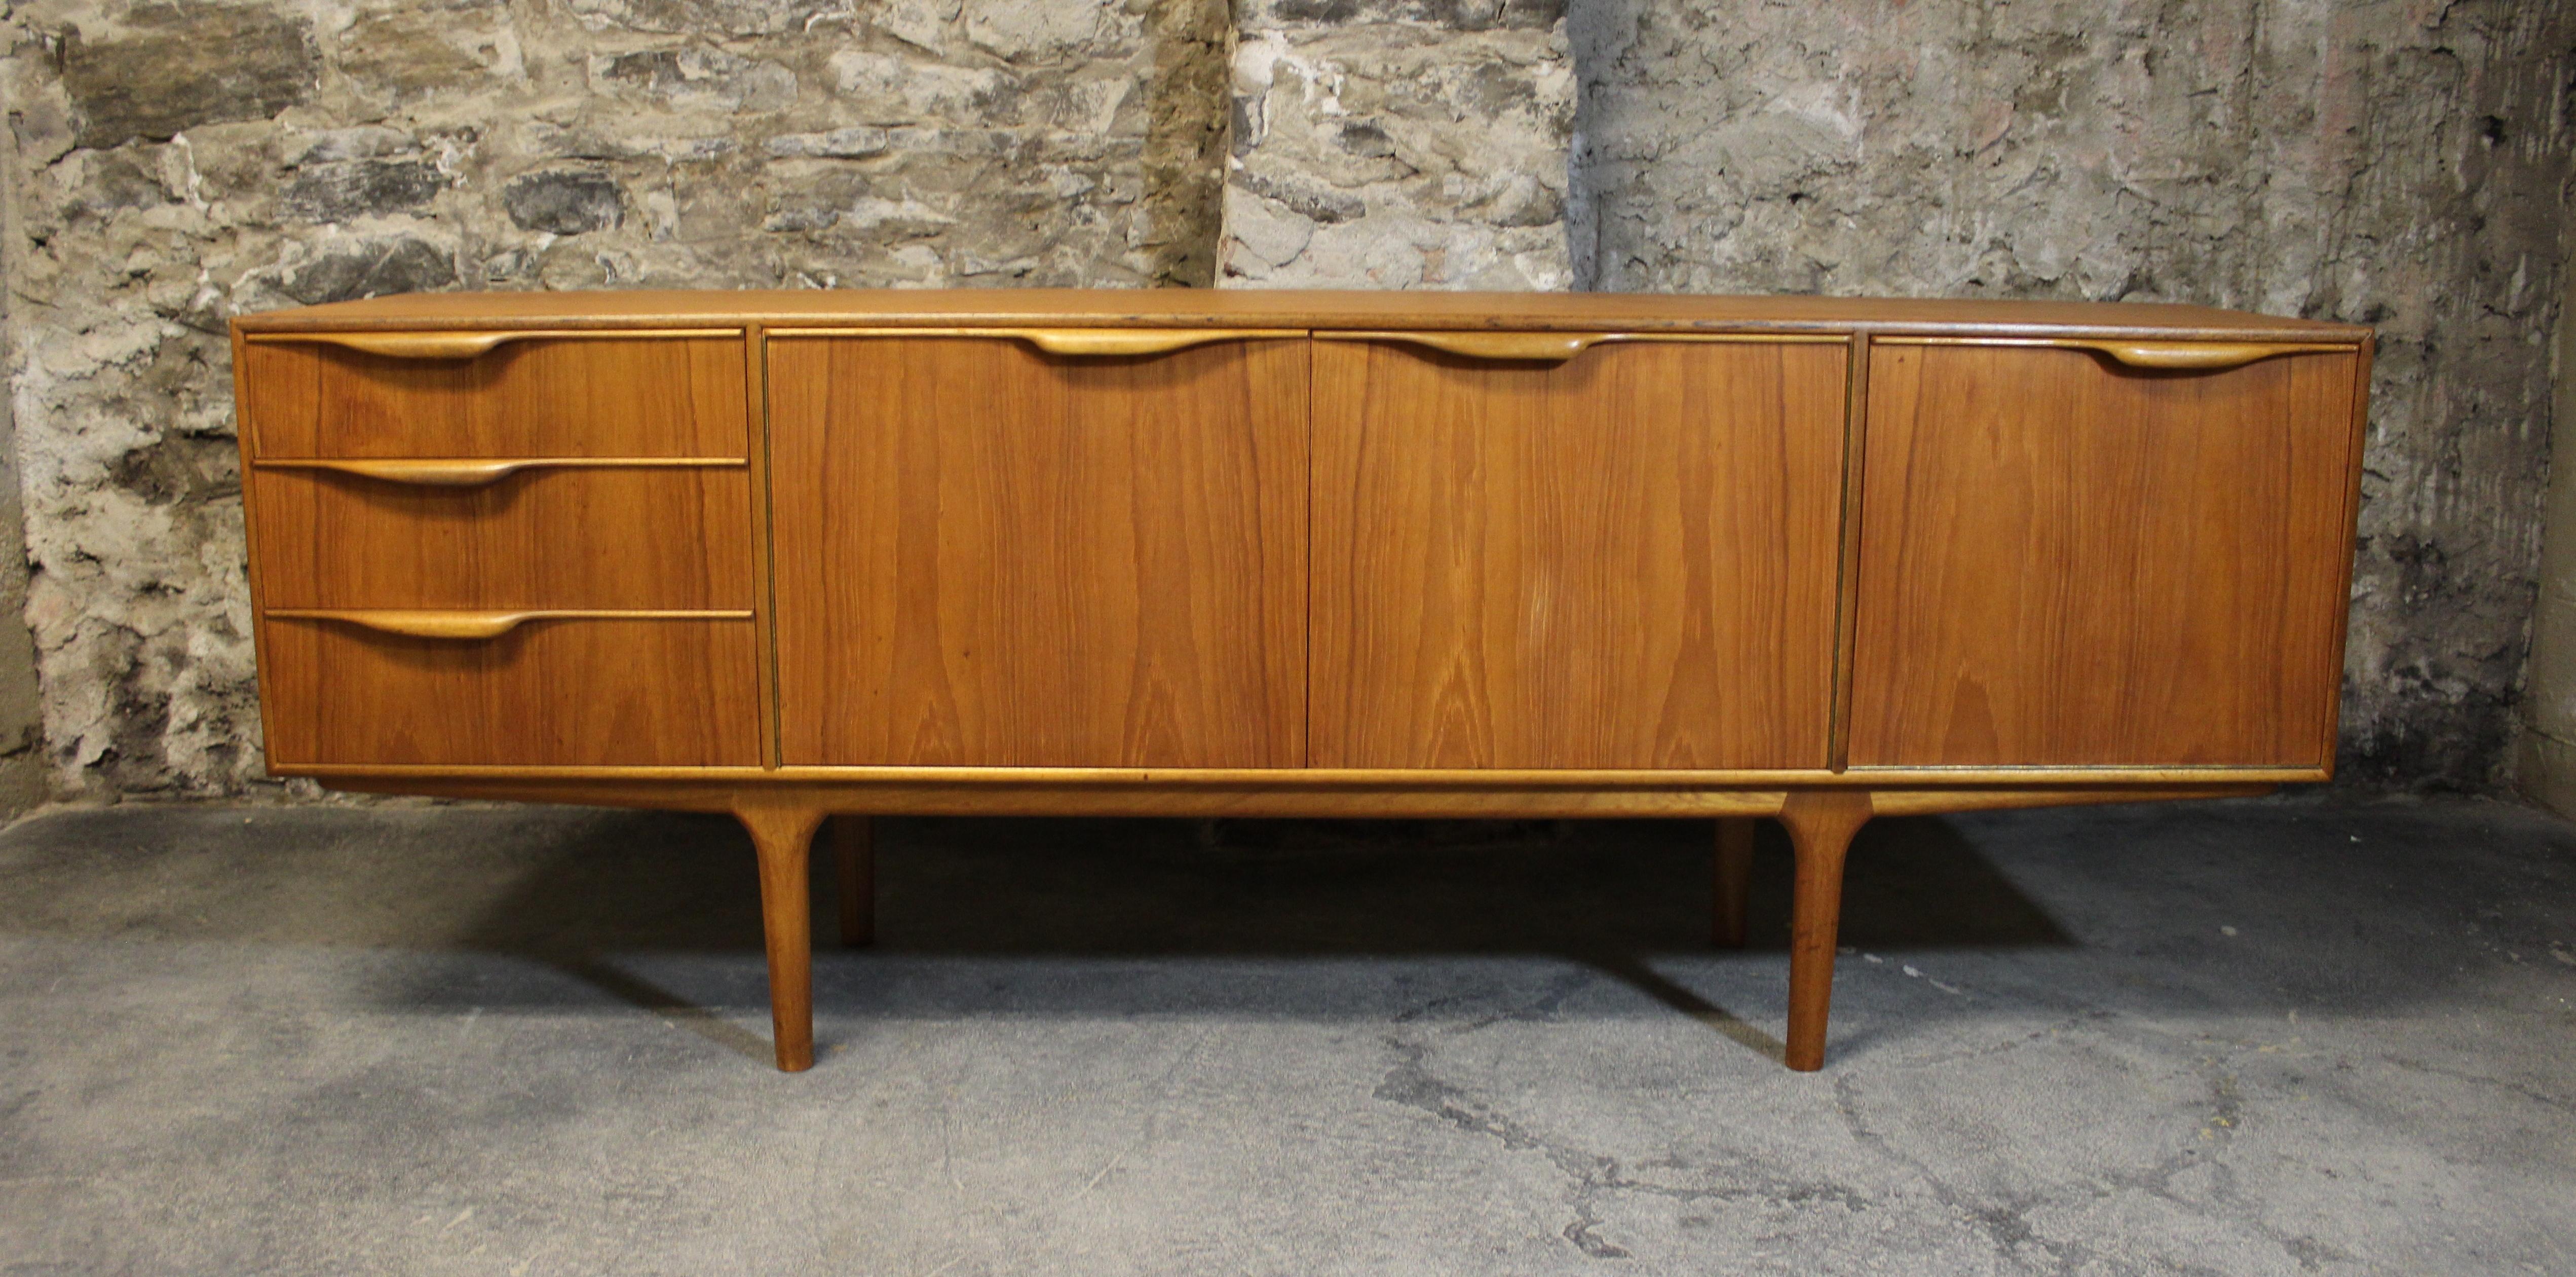 Sleekly and functionally designed teak sideboard with organically shaped handles and elegant tapered legs. 

 